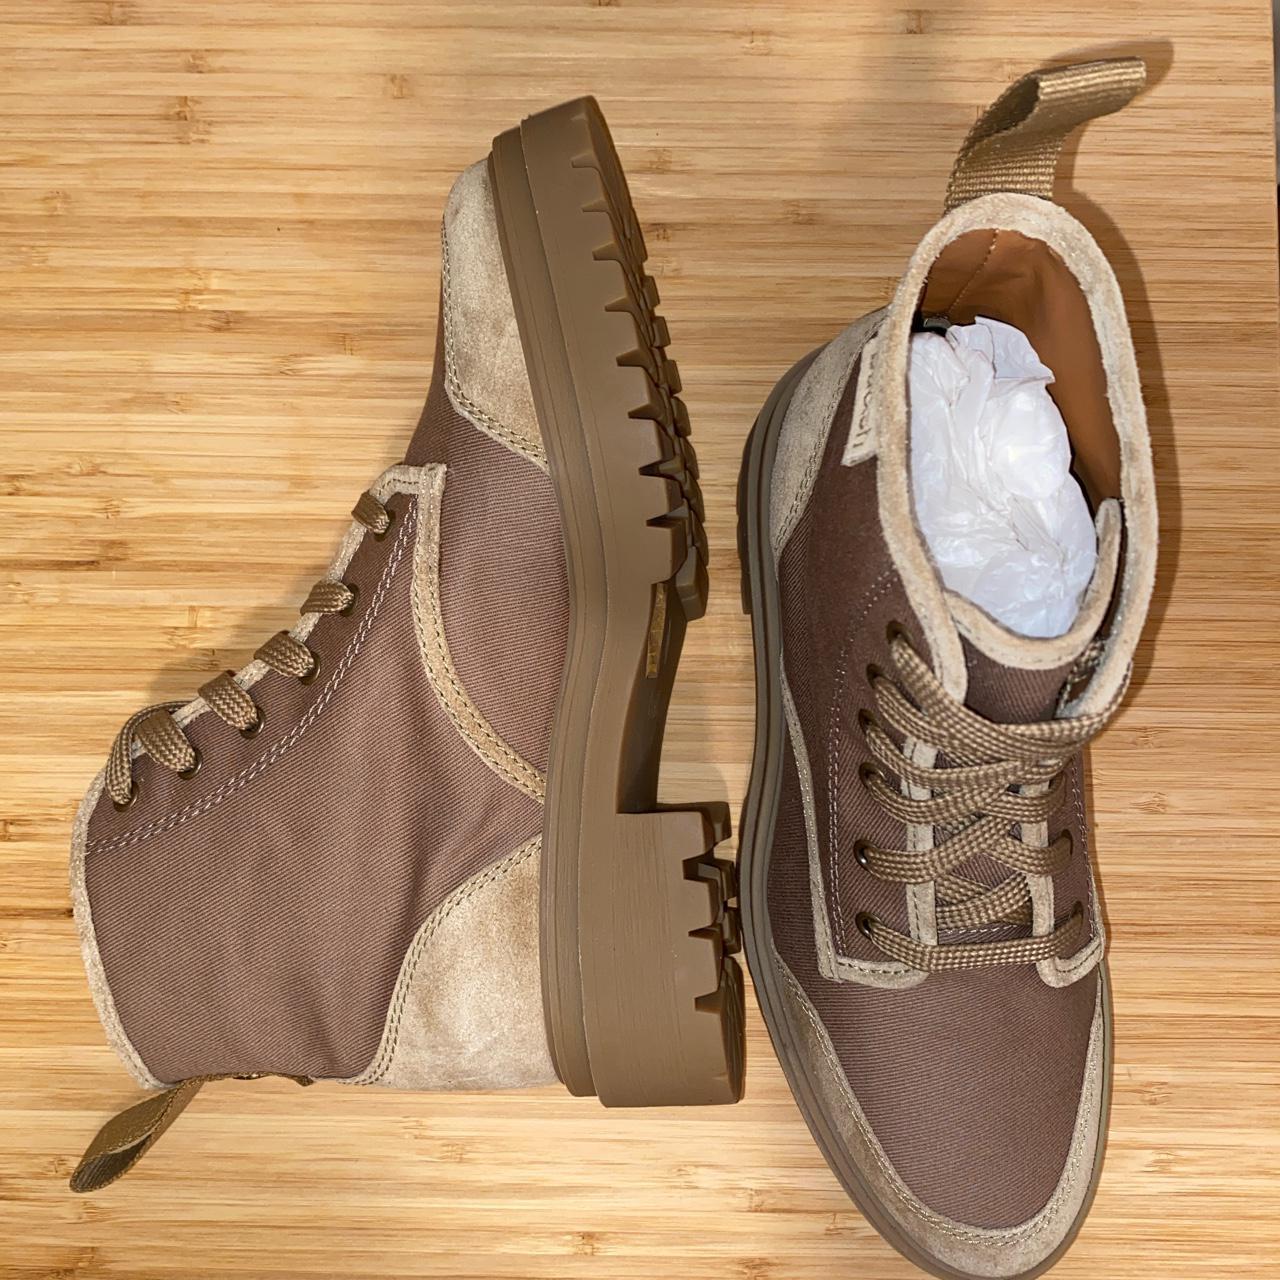 Ba&sh brand new canastra hiking boots, brown canvas - Depop